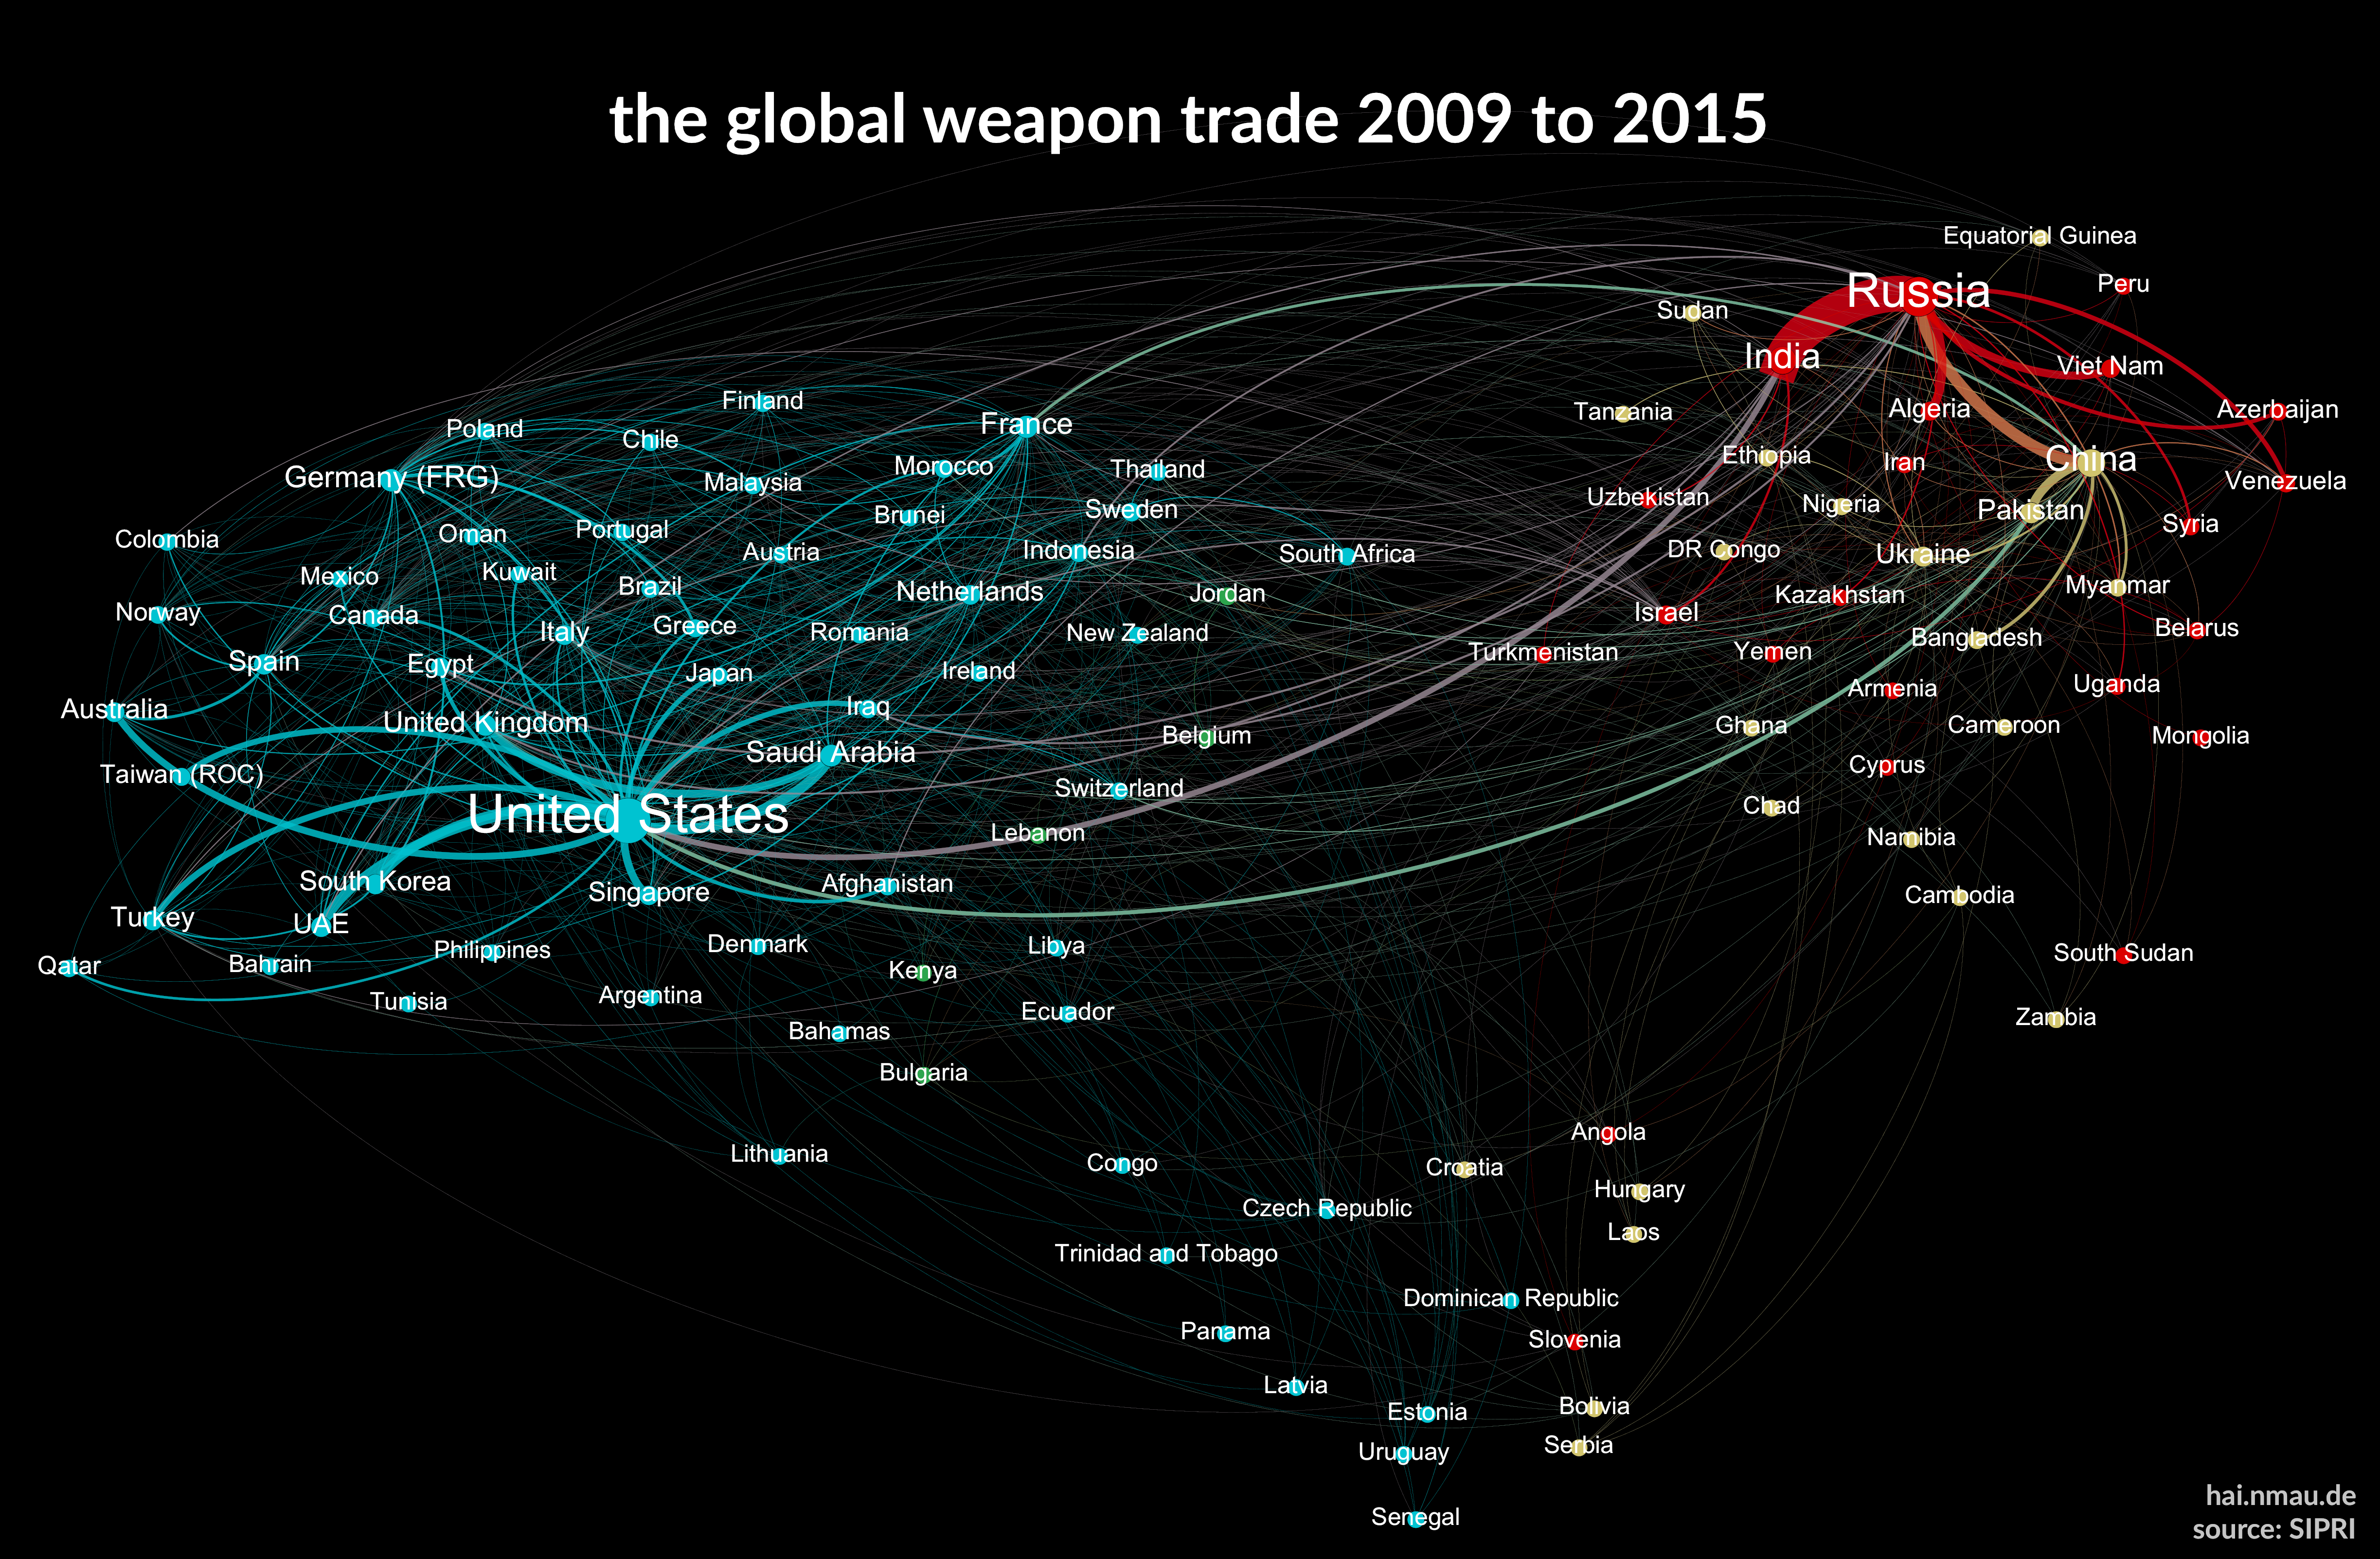 Visualizing the Global Weapons Trade